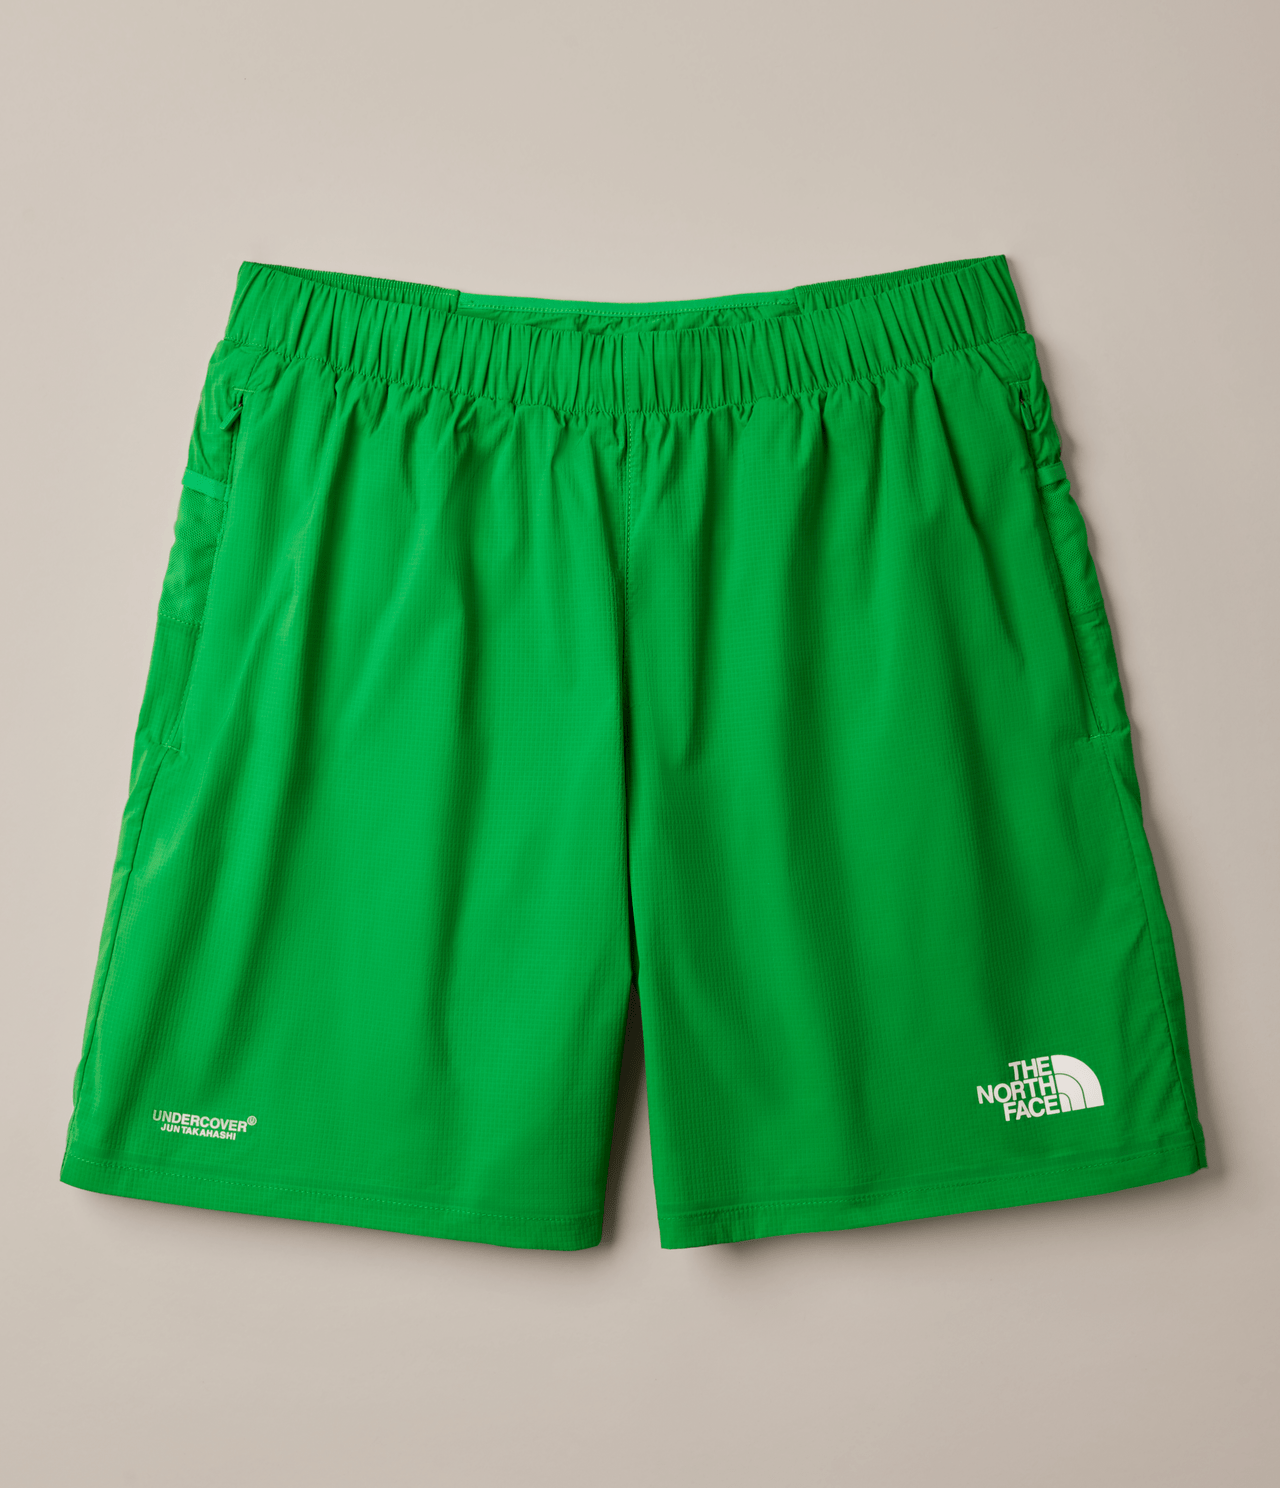 THE NORTH FACE ザ・ノース・フェイス UNDERCOVER アンダーカバー コラボ　THE NORTH FACE × UNDERCOVER Trail Run Utility 2-in-1 Shorts (ザ・ノース・フェイス x アンダーカバー トレイルラン・ユーティリティ・2-in-1 ショーツ)　グリーン